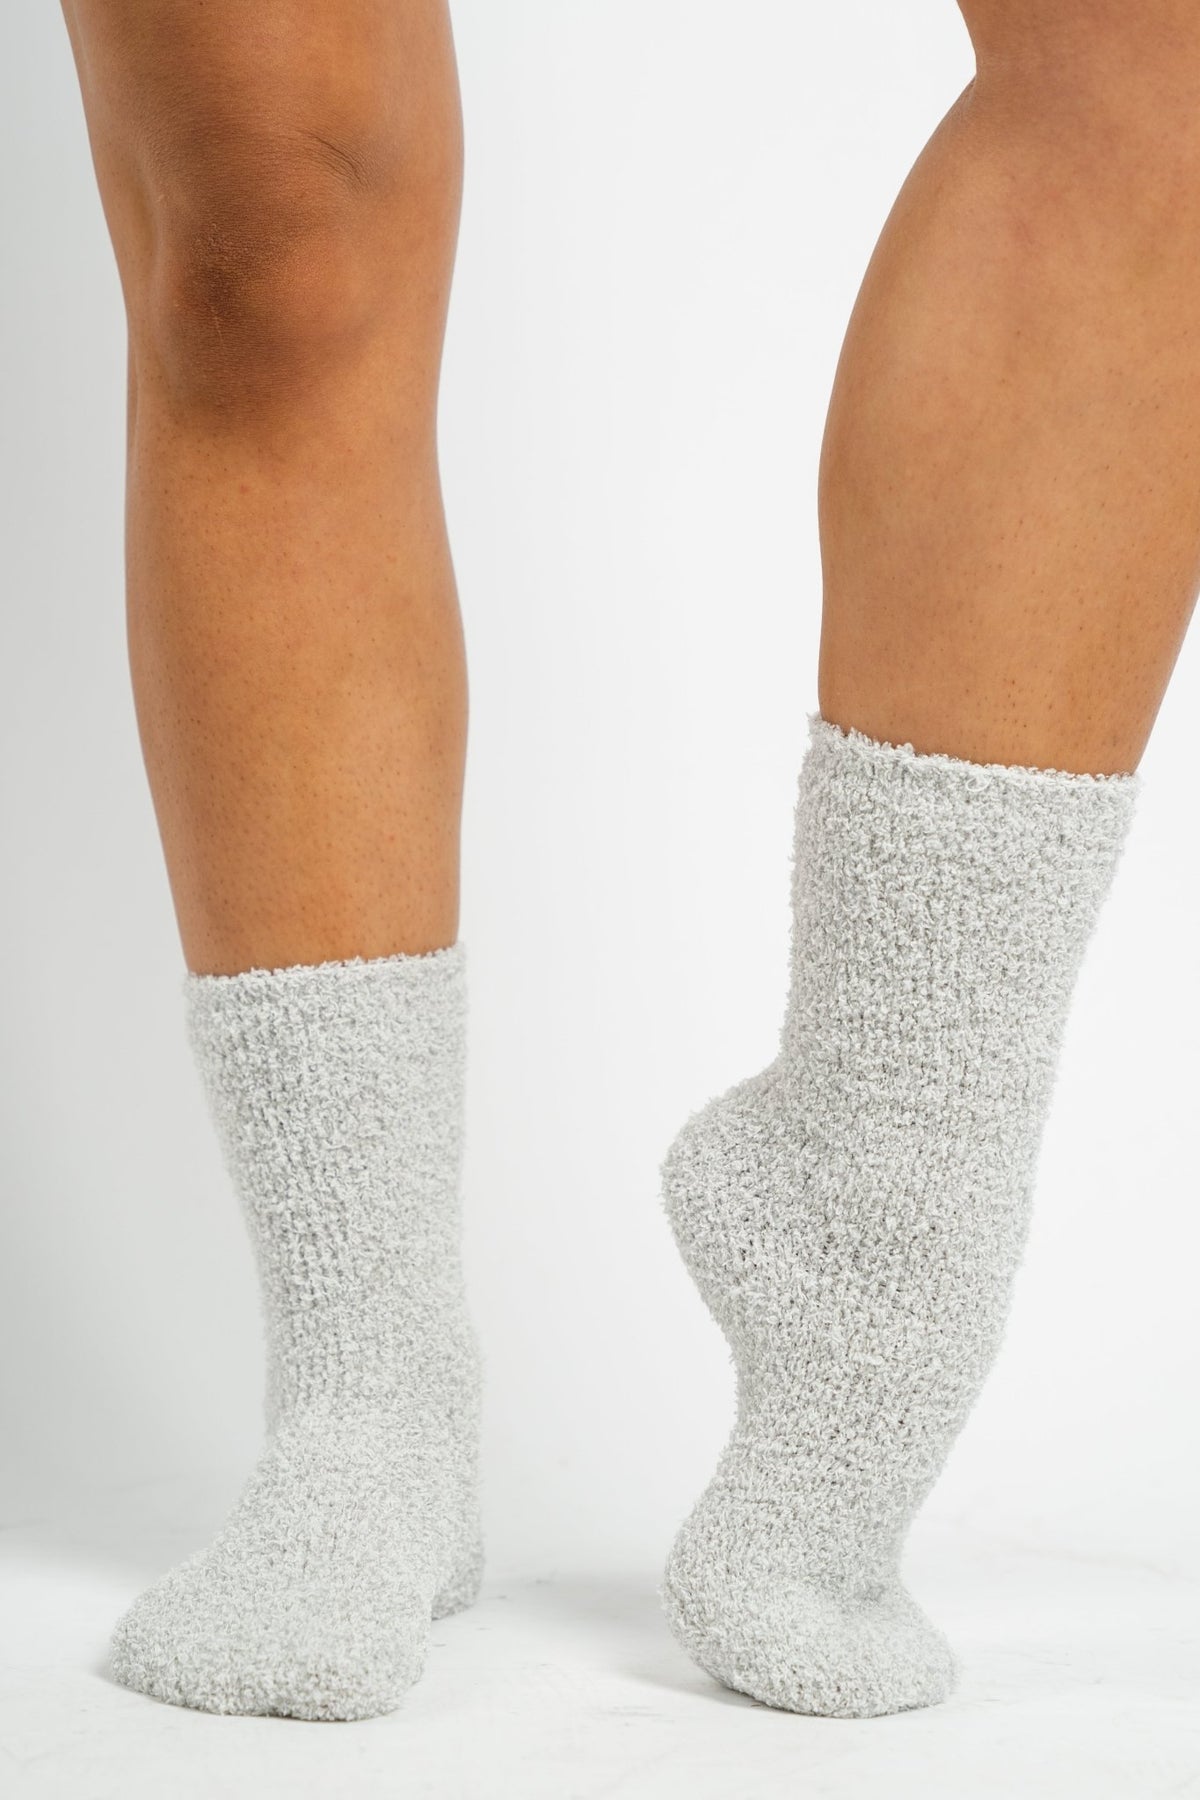 Z Supply plush socks heather grey 2 pack - Z Supply socks - Z Supply Tops, Dresses, Tanks, Tees, Cardigans, Joggers and Loungewear at Lush Fashion Lounge